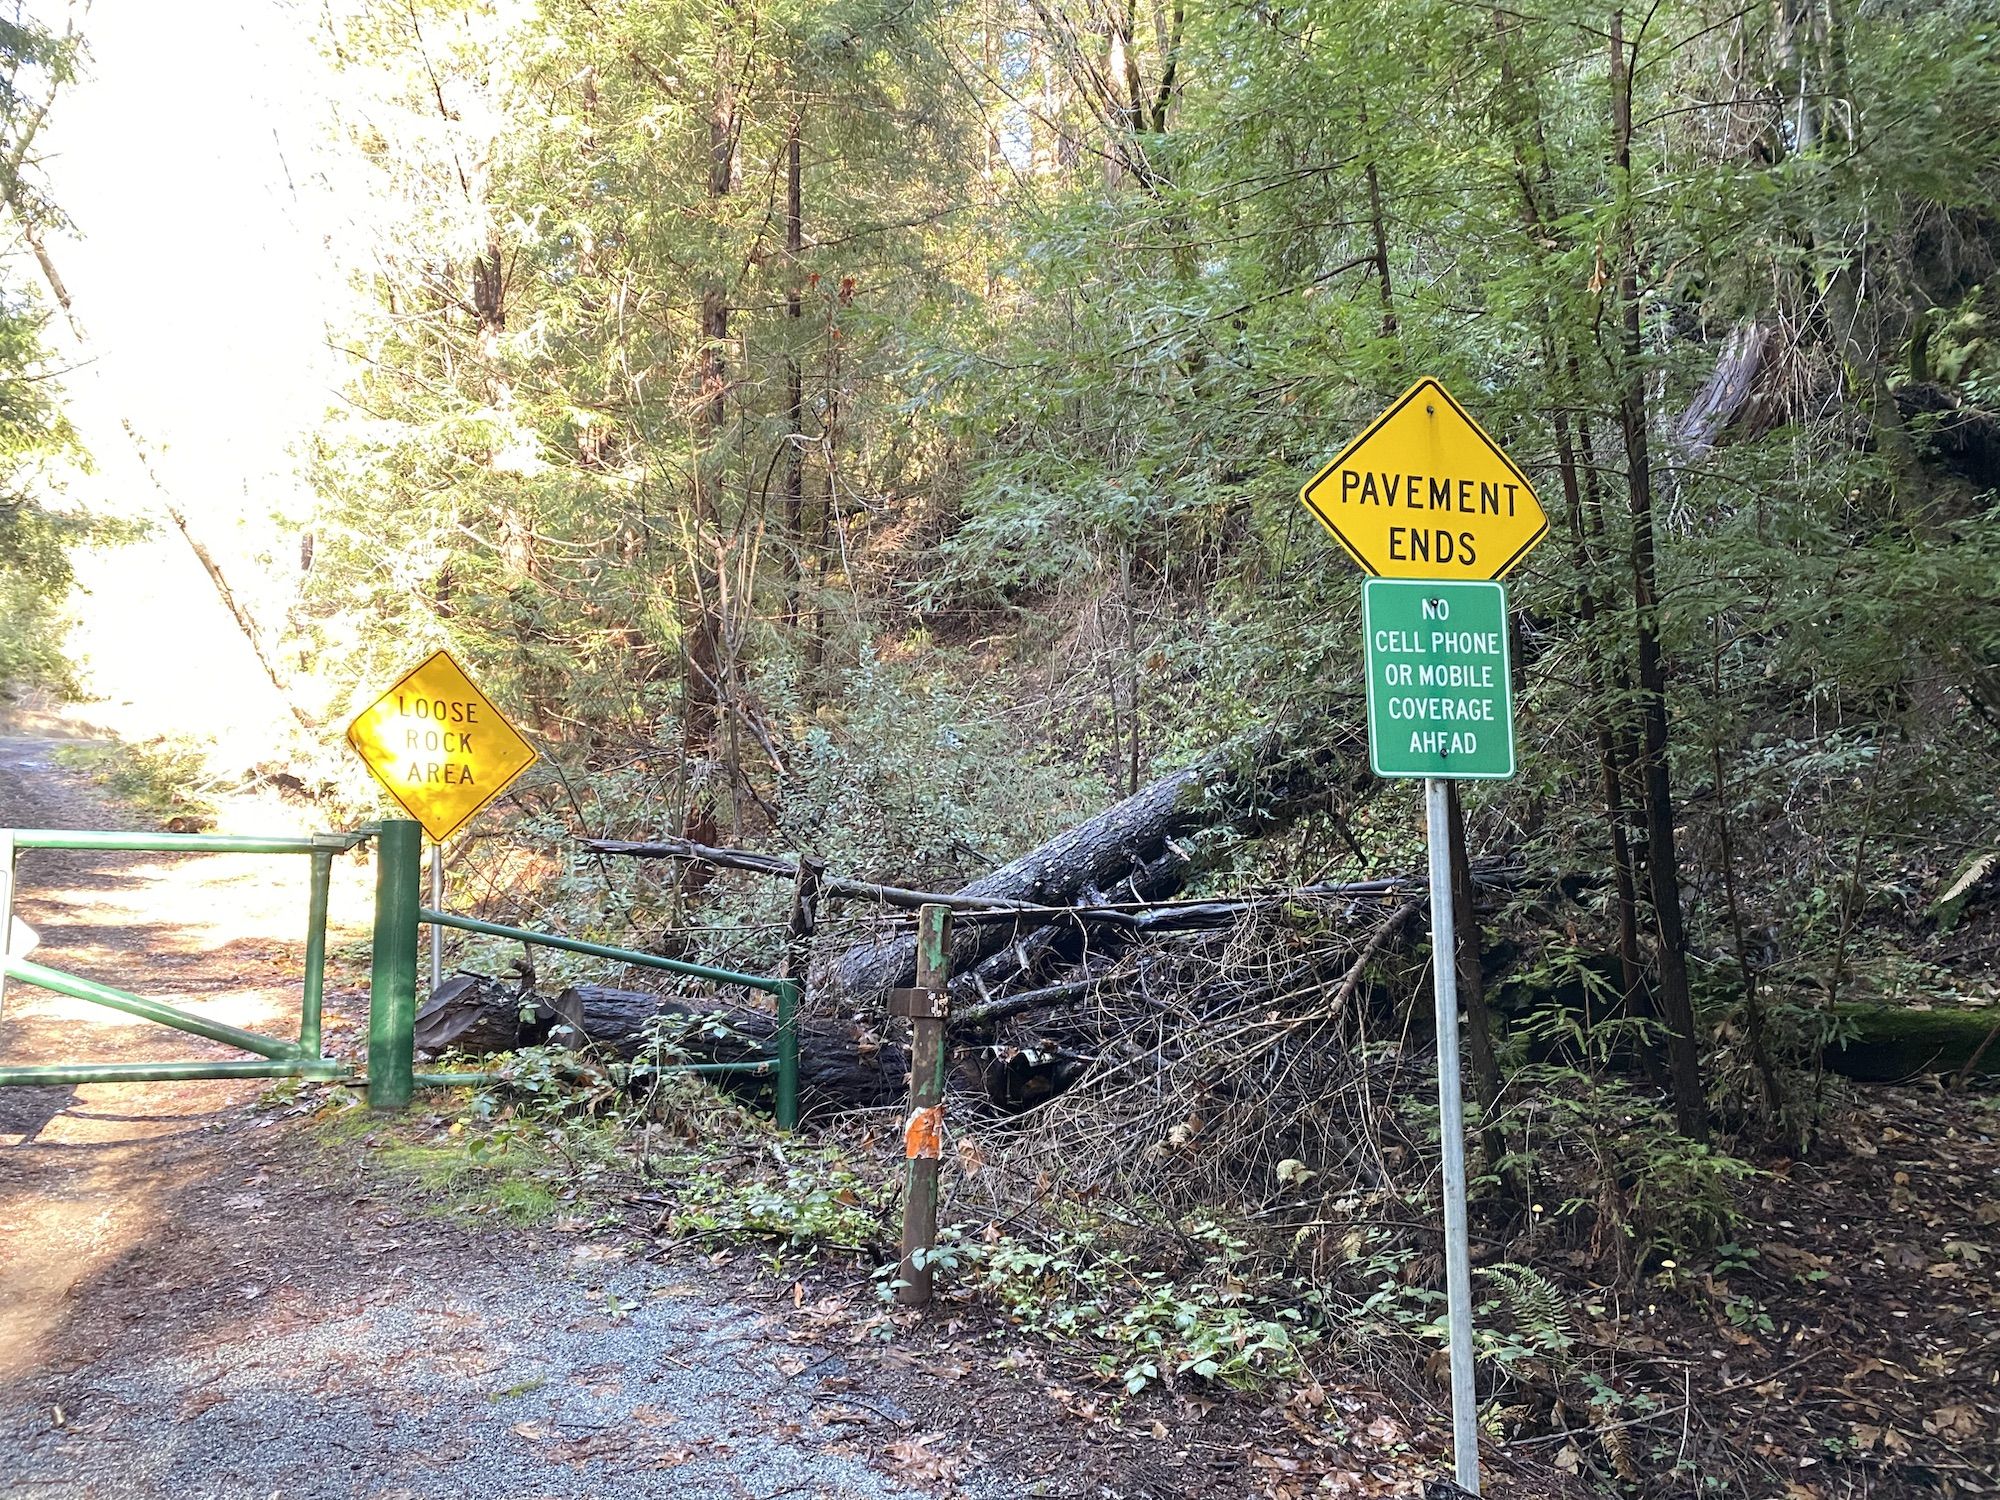 A locked gate with signs warning of loose rocks, lack of pavement, and no cell phone signal.